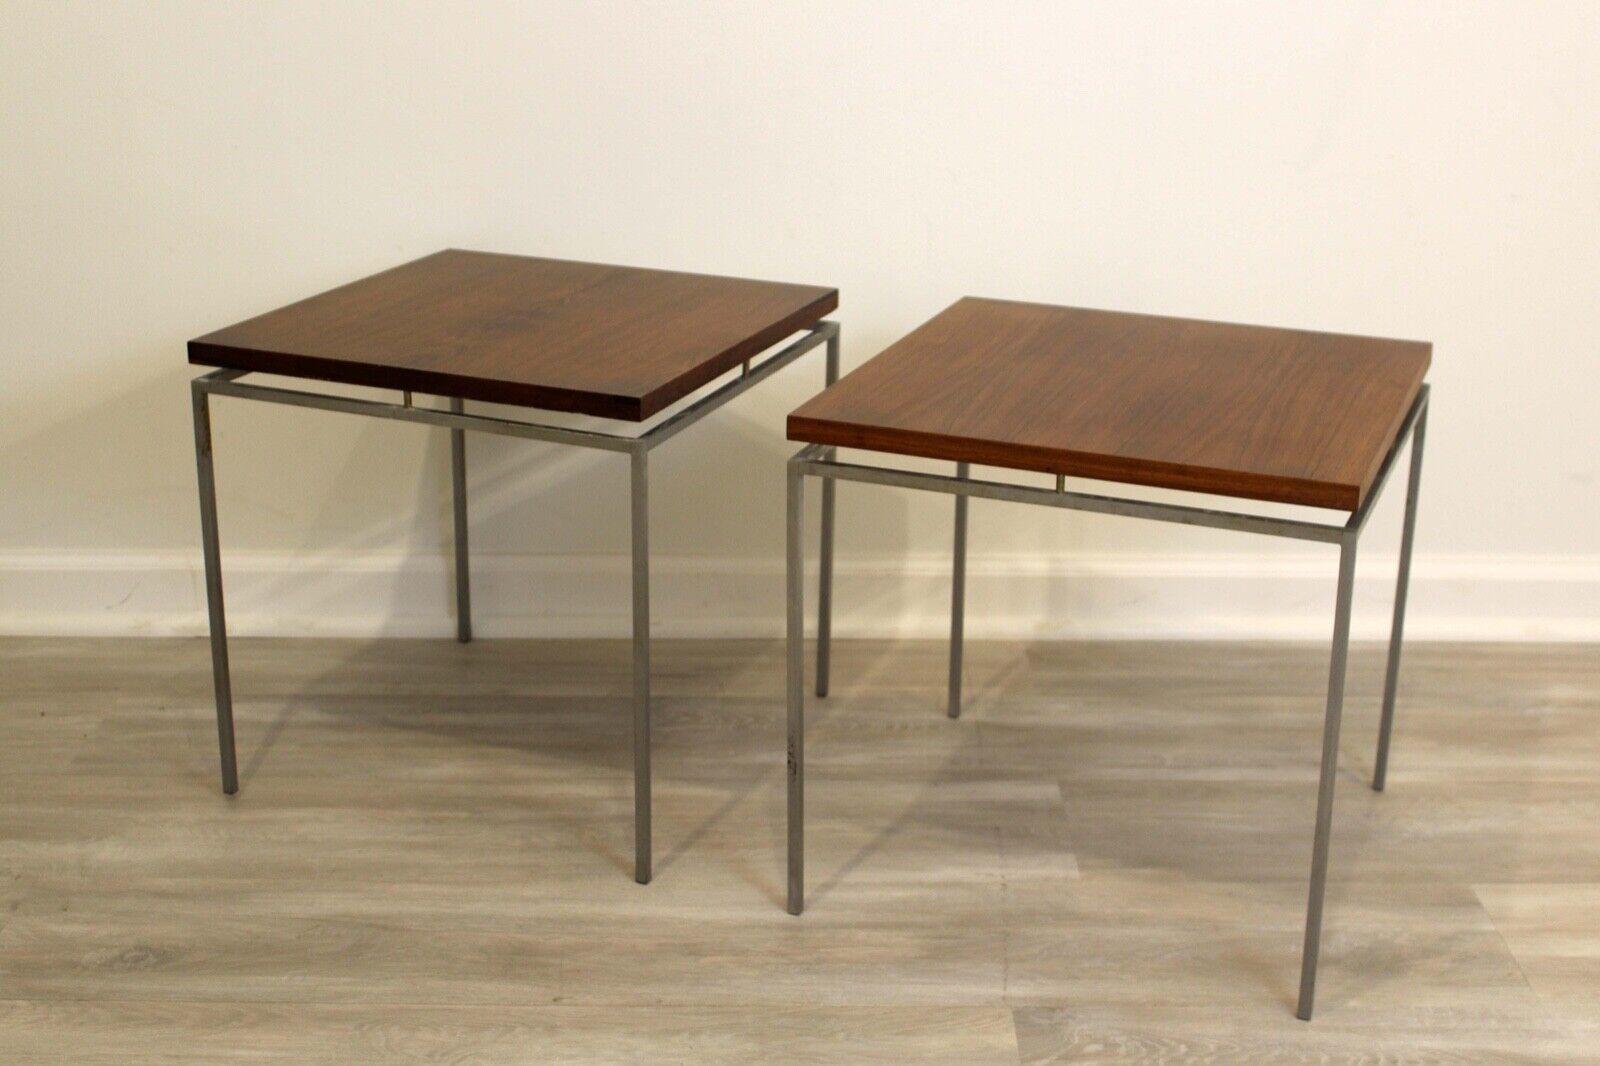 20th Century Pair of Mid-Century Modern Danish Rosewood Side Tables by Knud Joos for Mobler